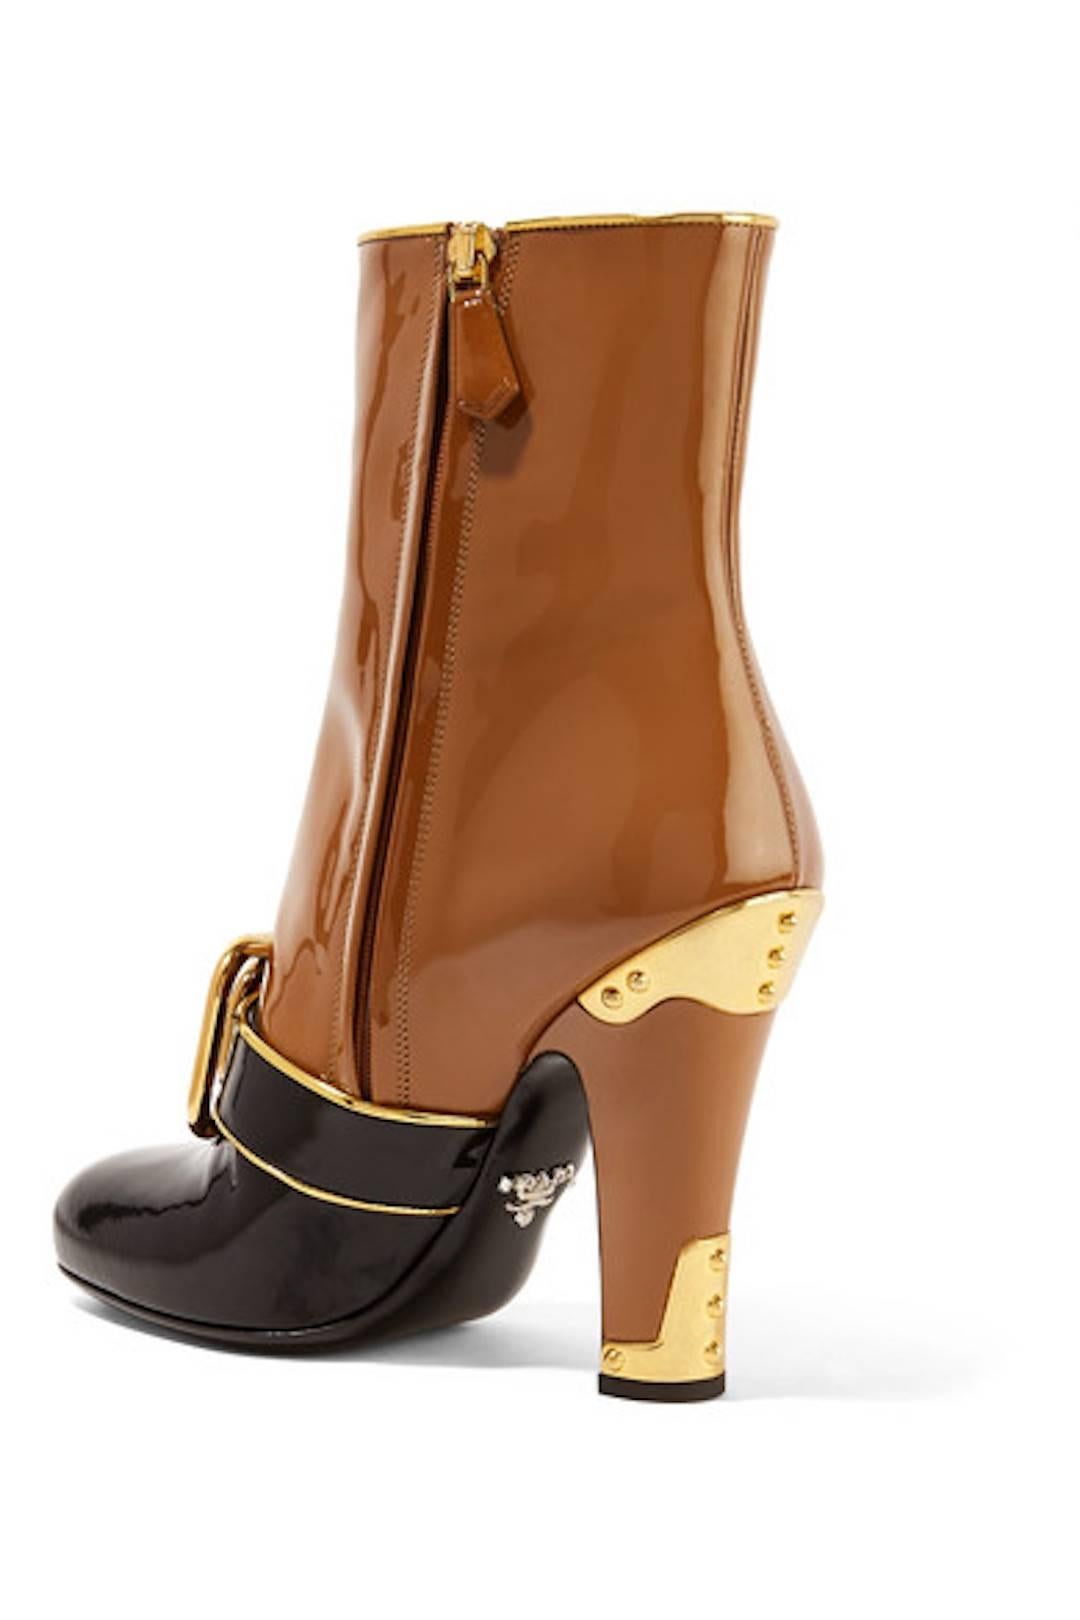 Women's Prada NEW Runway Cognac Colorblock Gold Patent Ankle Boots Shoes in Box